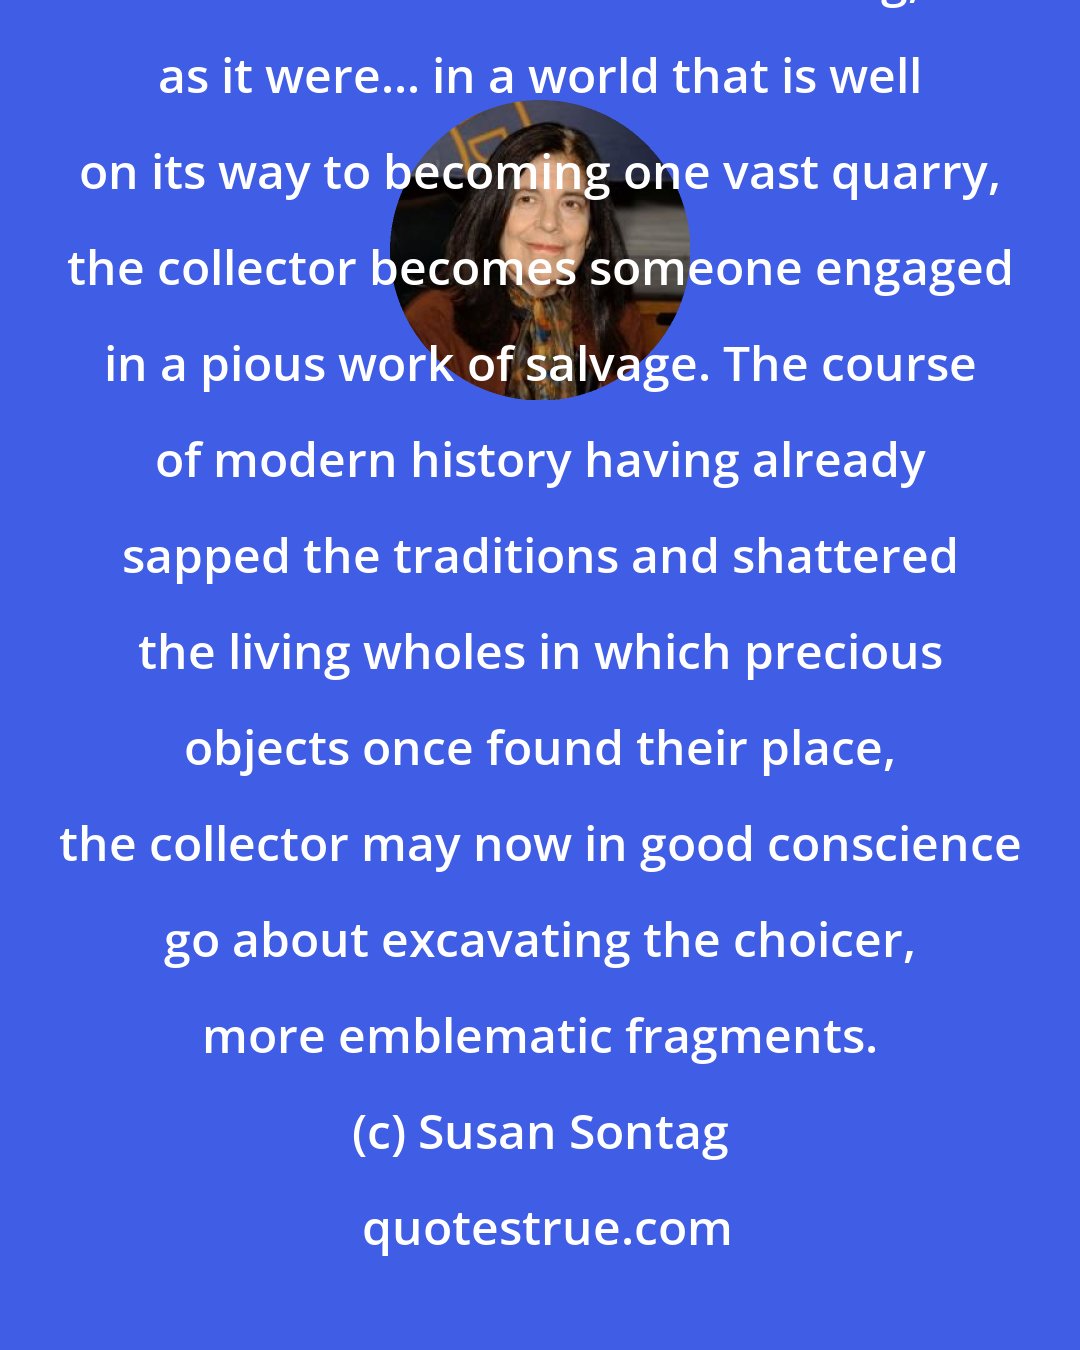 Susan Sontag: Though collecting quotations could be considered as merely an ironic mimetism -- victimless collecting, as it were... in a world that is well on its way to becoming one vast quarry, the collector becomes someone engaged in a pious work of salvage. The course of modern history having already sapped the traditions and shattered the living wholes in which precious objects once found their place, the collector may now in good conscience go about excavating the choicer, more emblematic fragments.